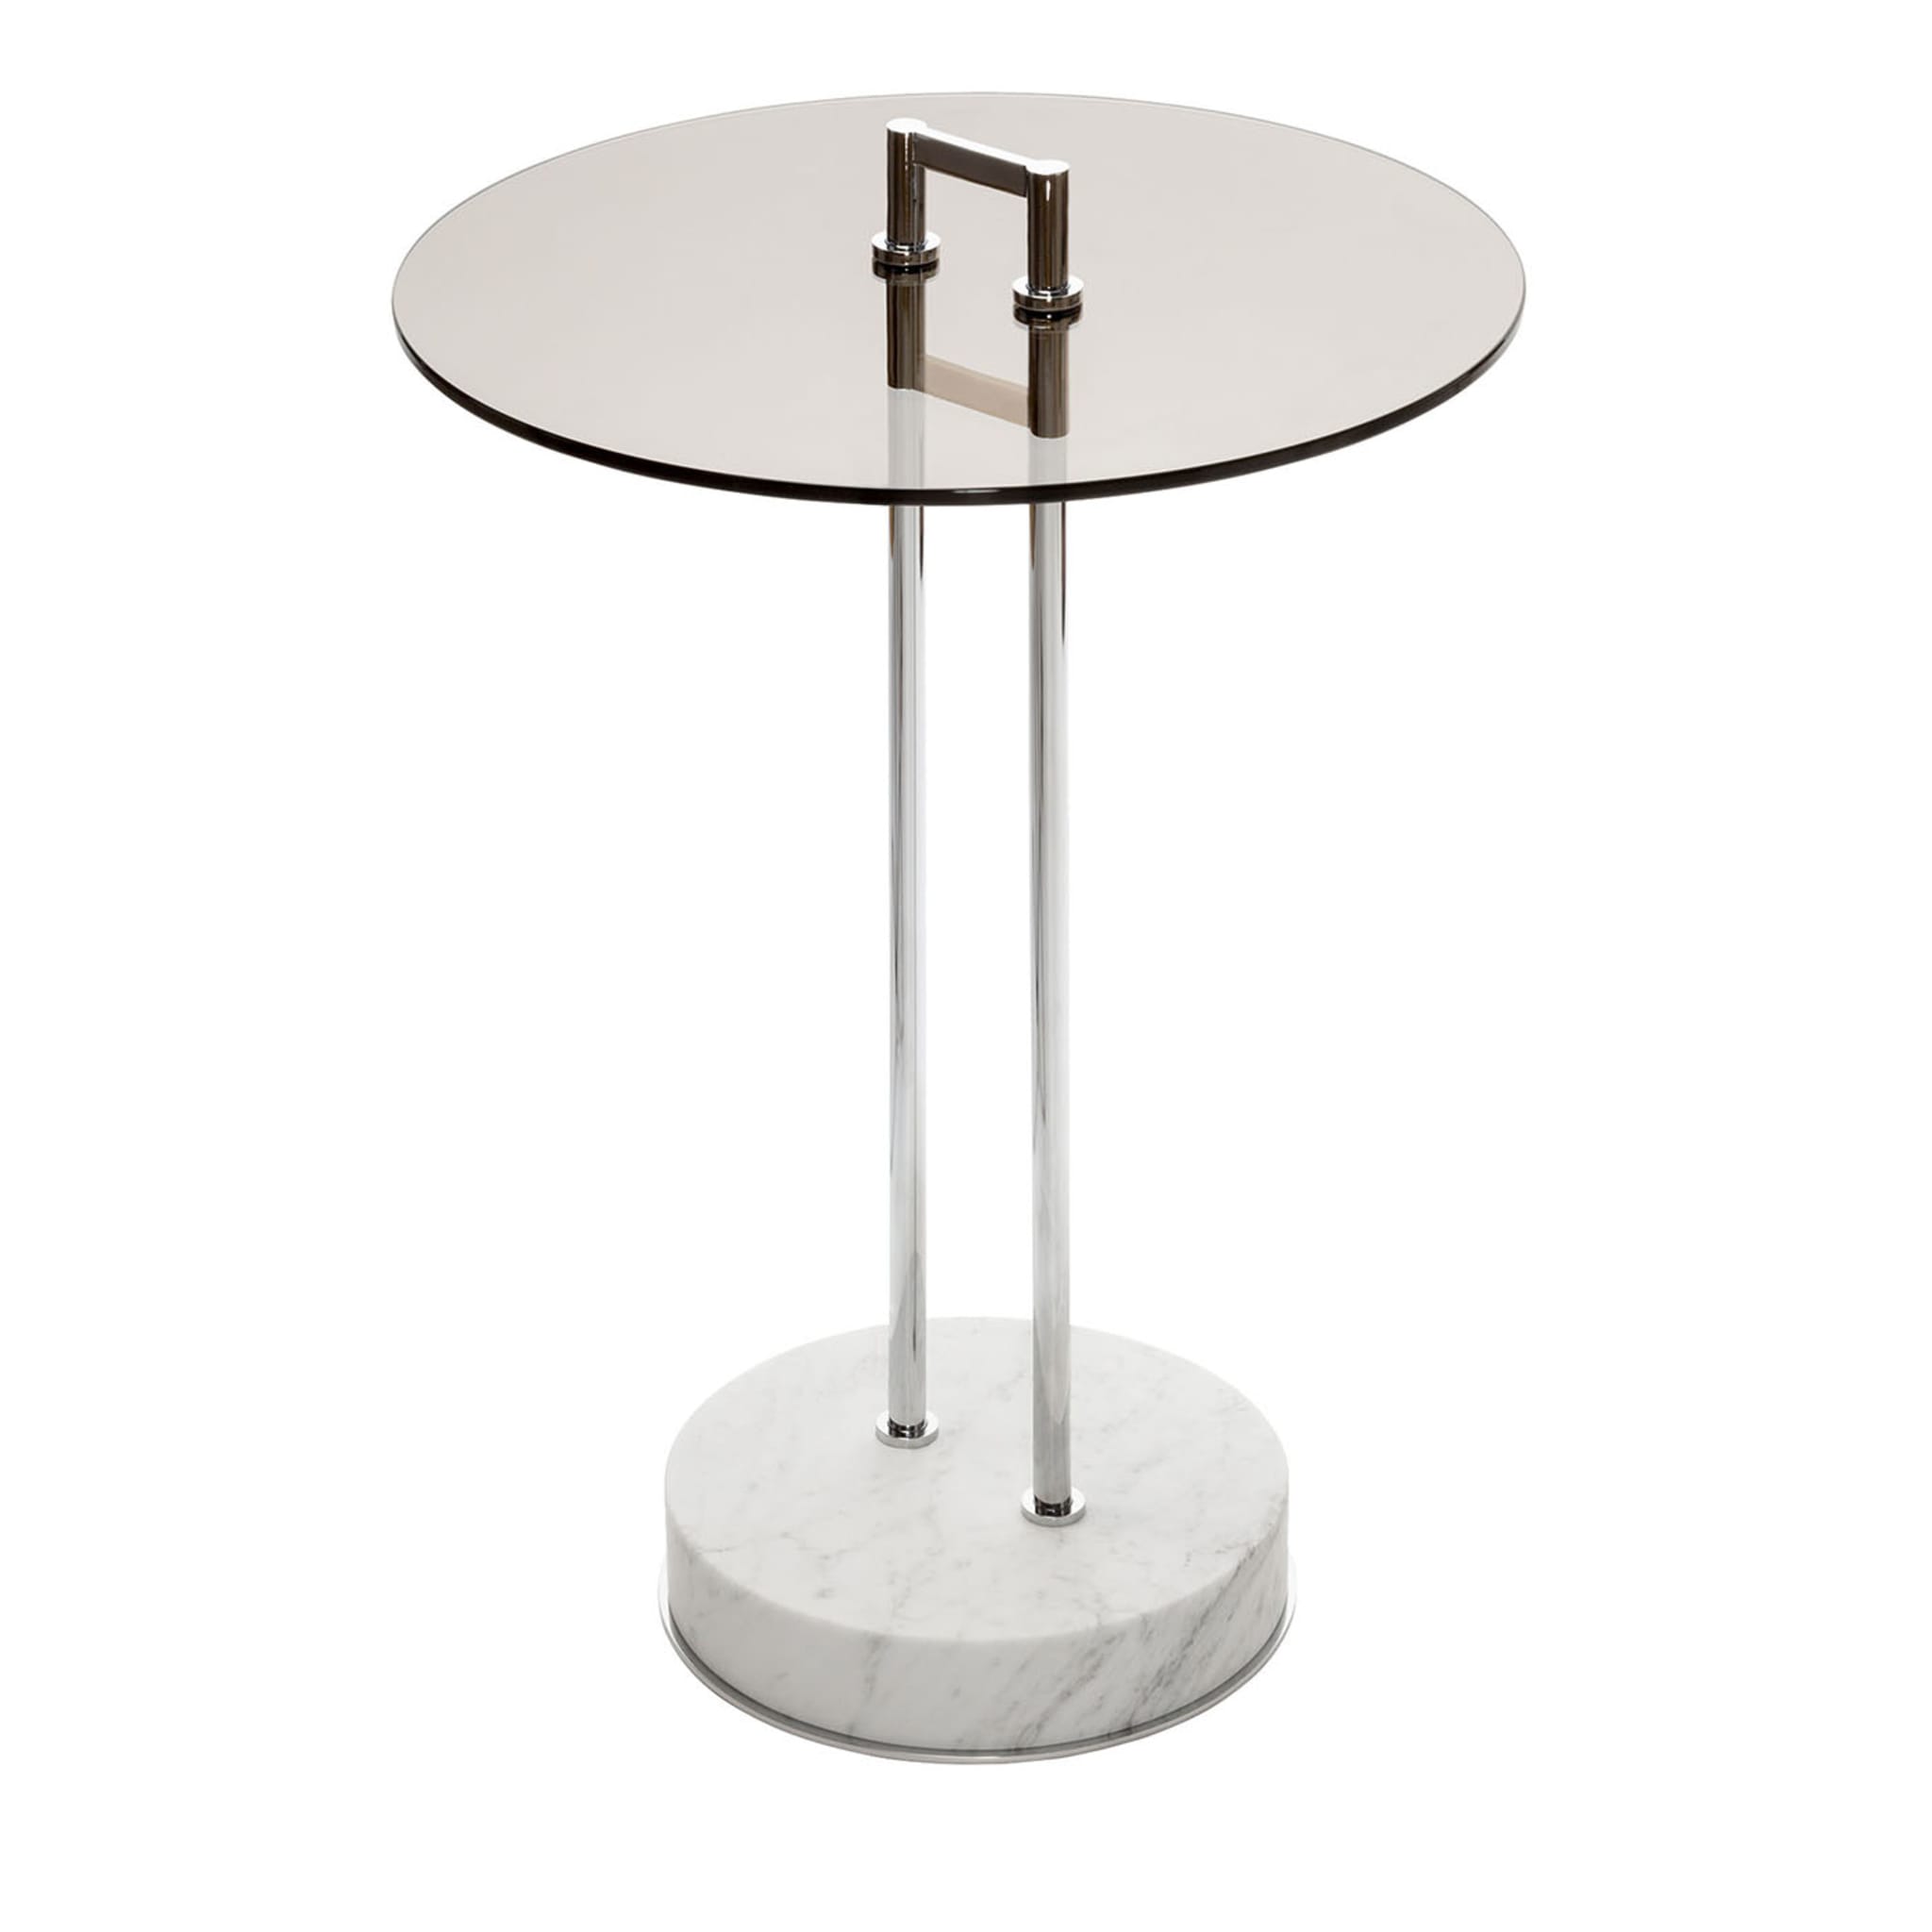 Urbino Marble Occasional Table #1 - Main view